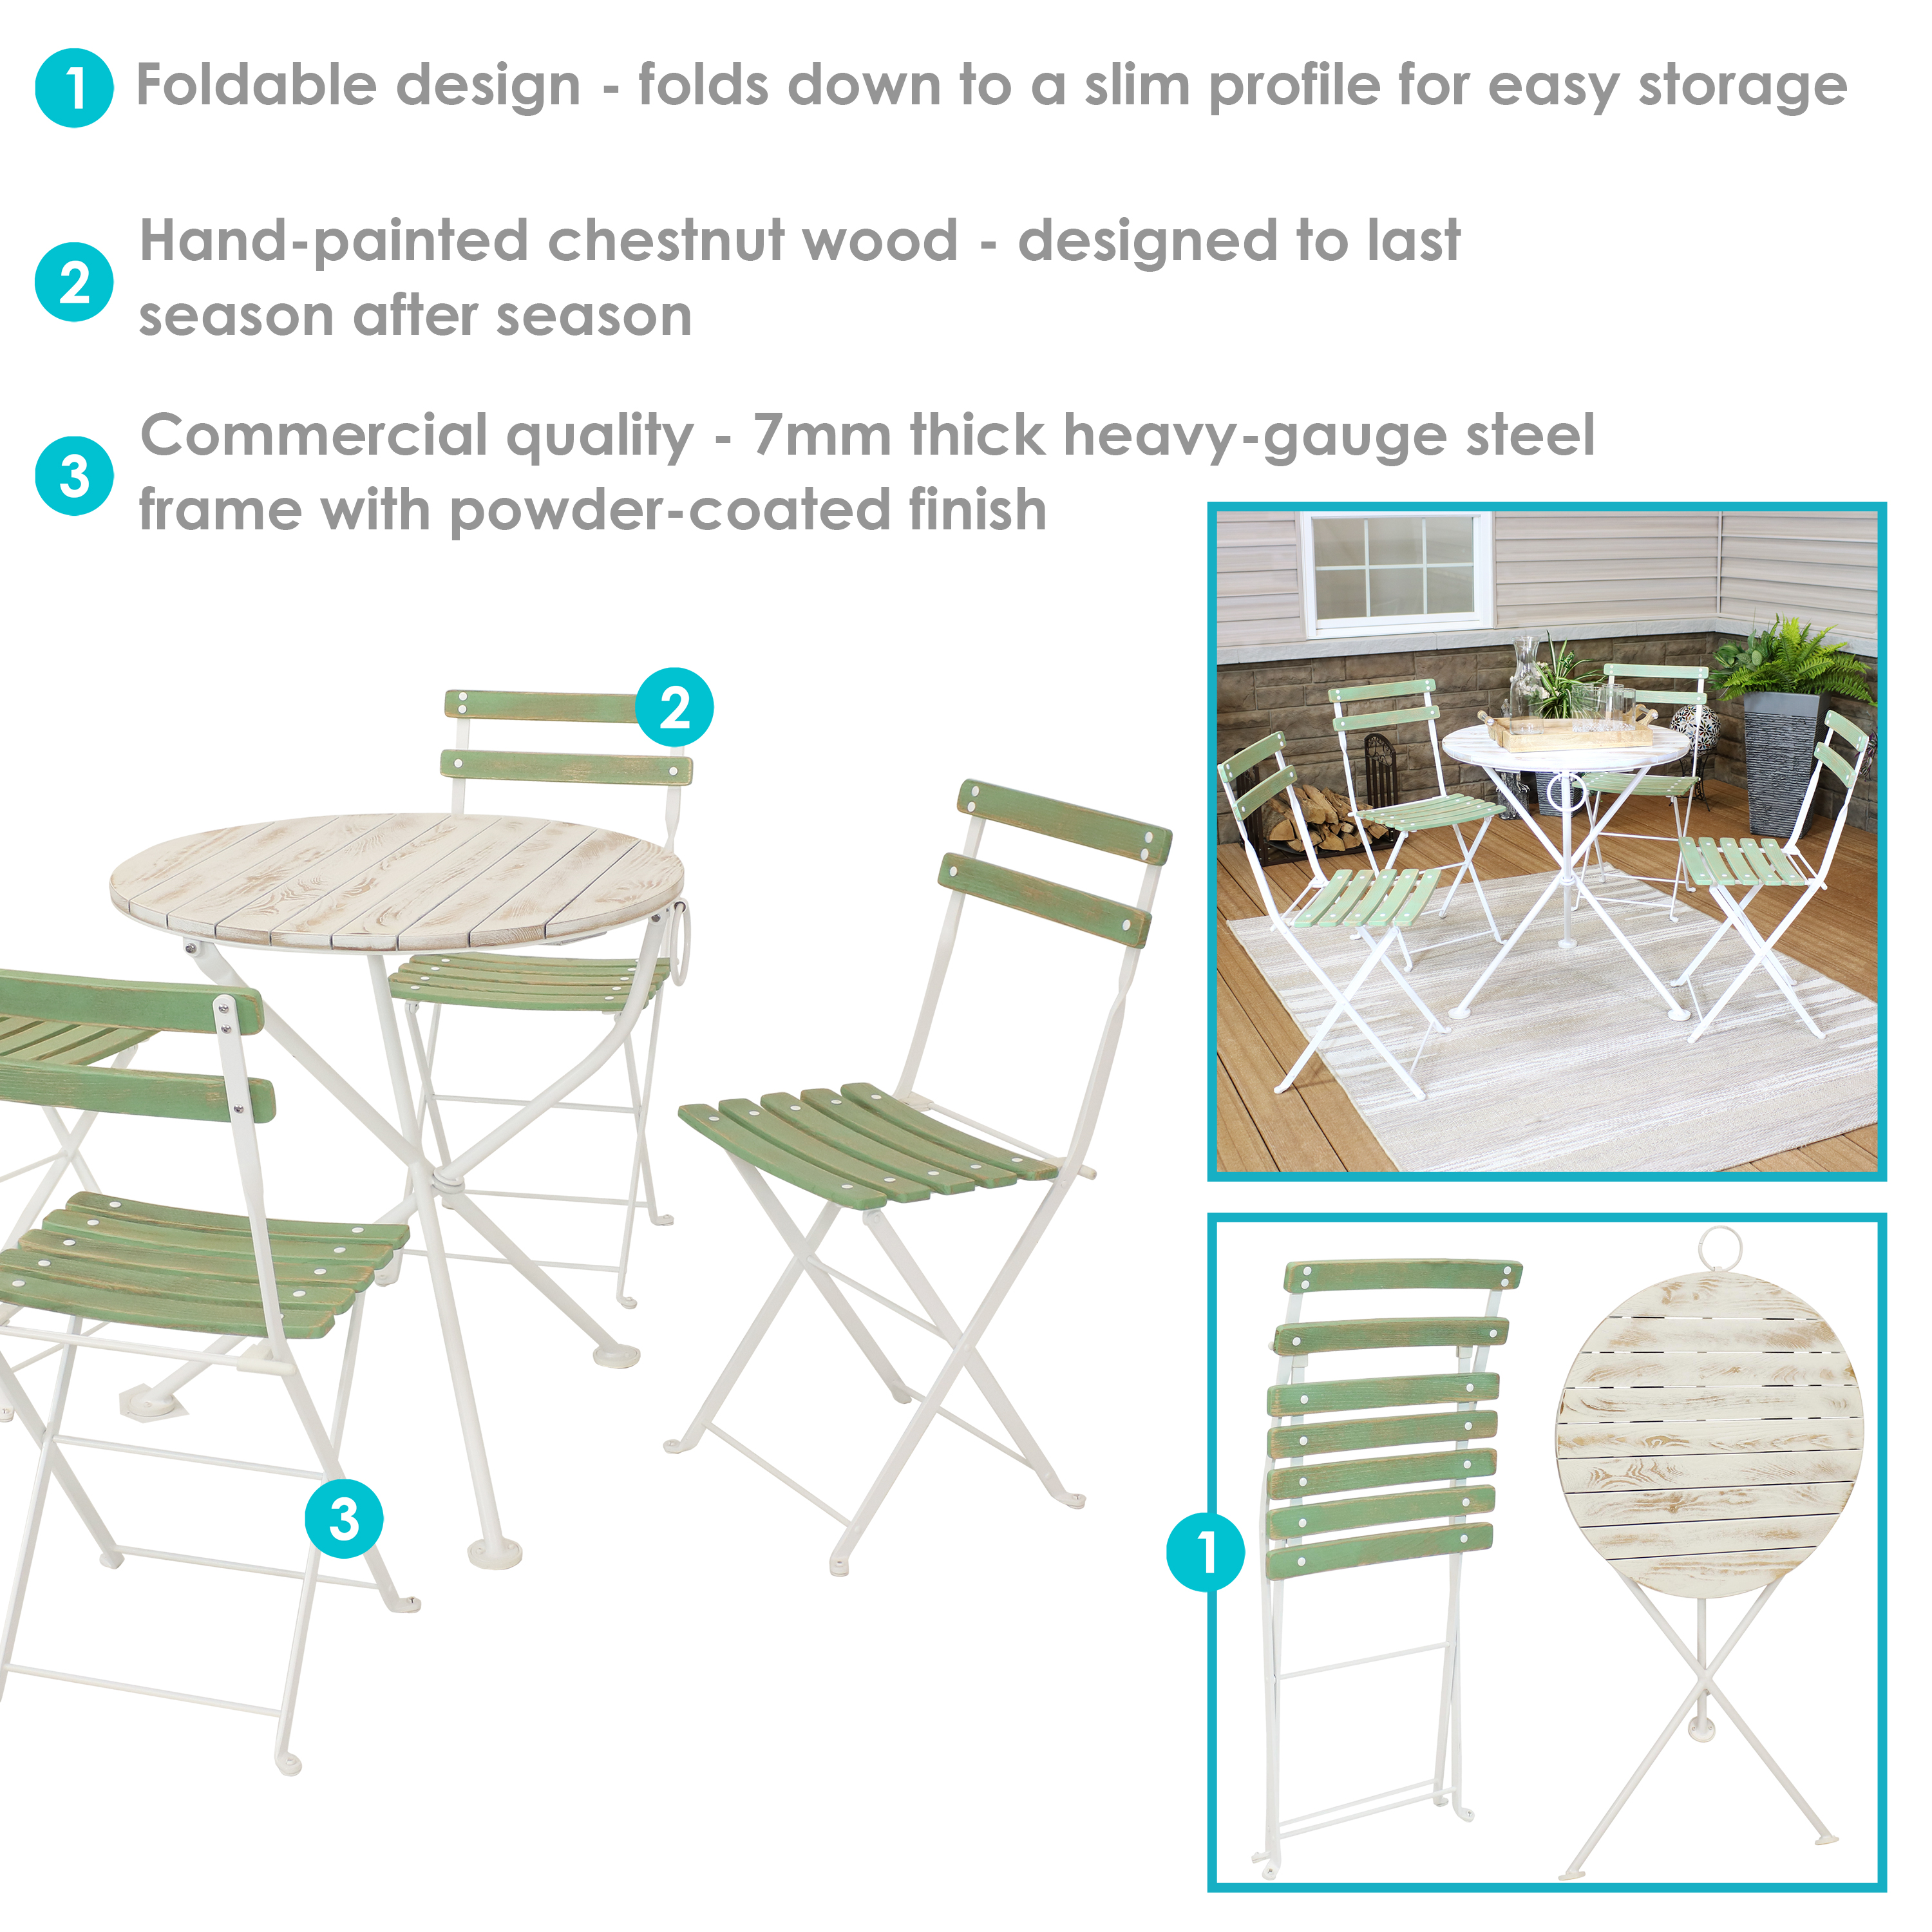 Sunnydaze Indoor/Outdoor Classic European Café Chestnut Wood Folding Bistro Table and Chairs - Antique Green - 5pc - image 4 of 9